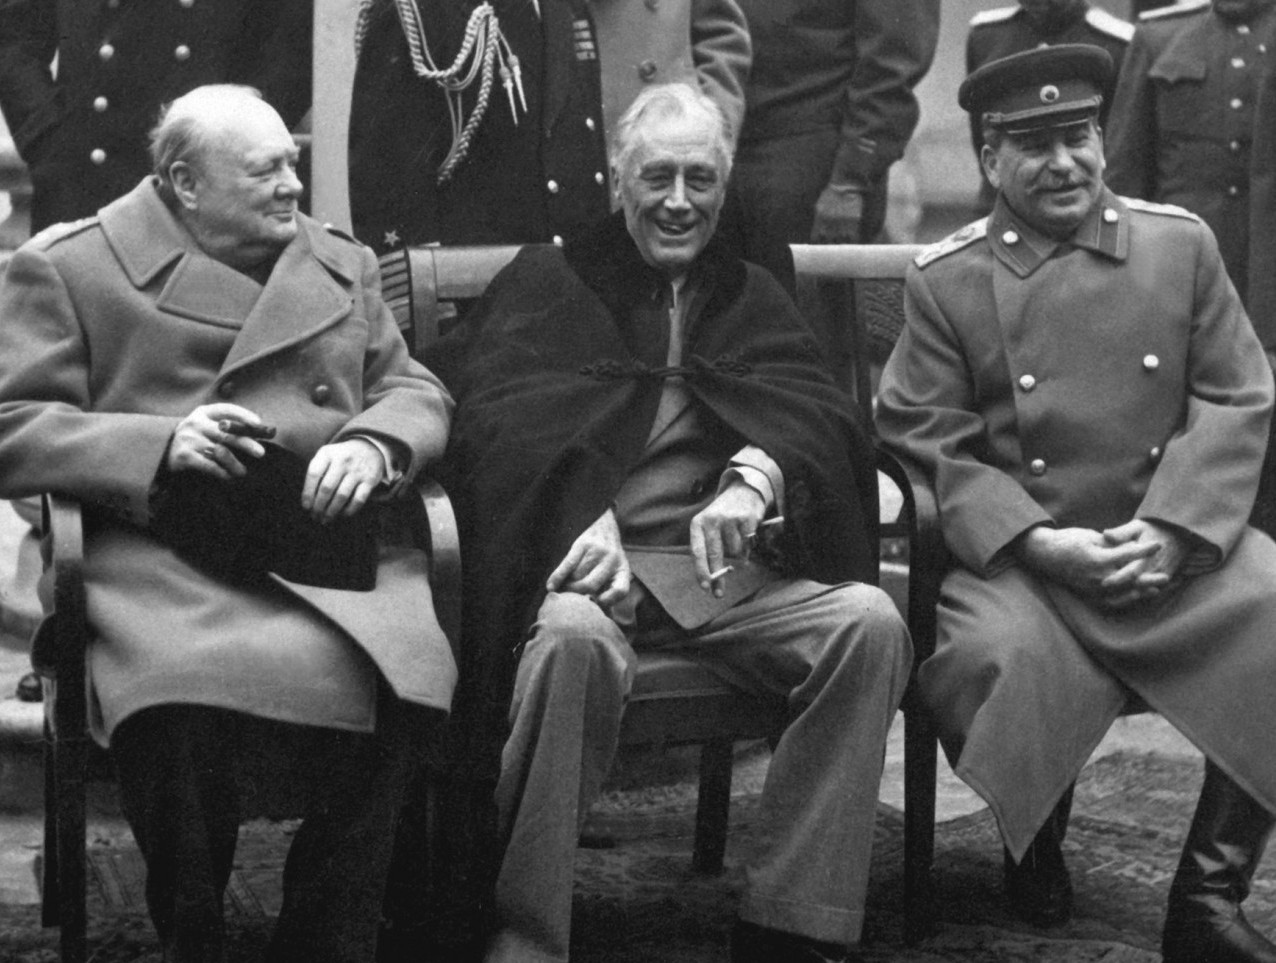 "Big Three" at Yalta in February 1945: Prime Minister Winston Churchill, President Franklin D. Roosevelt, and Premier Josef Stalin. Source: National Archives and Records Administration, Public domain.